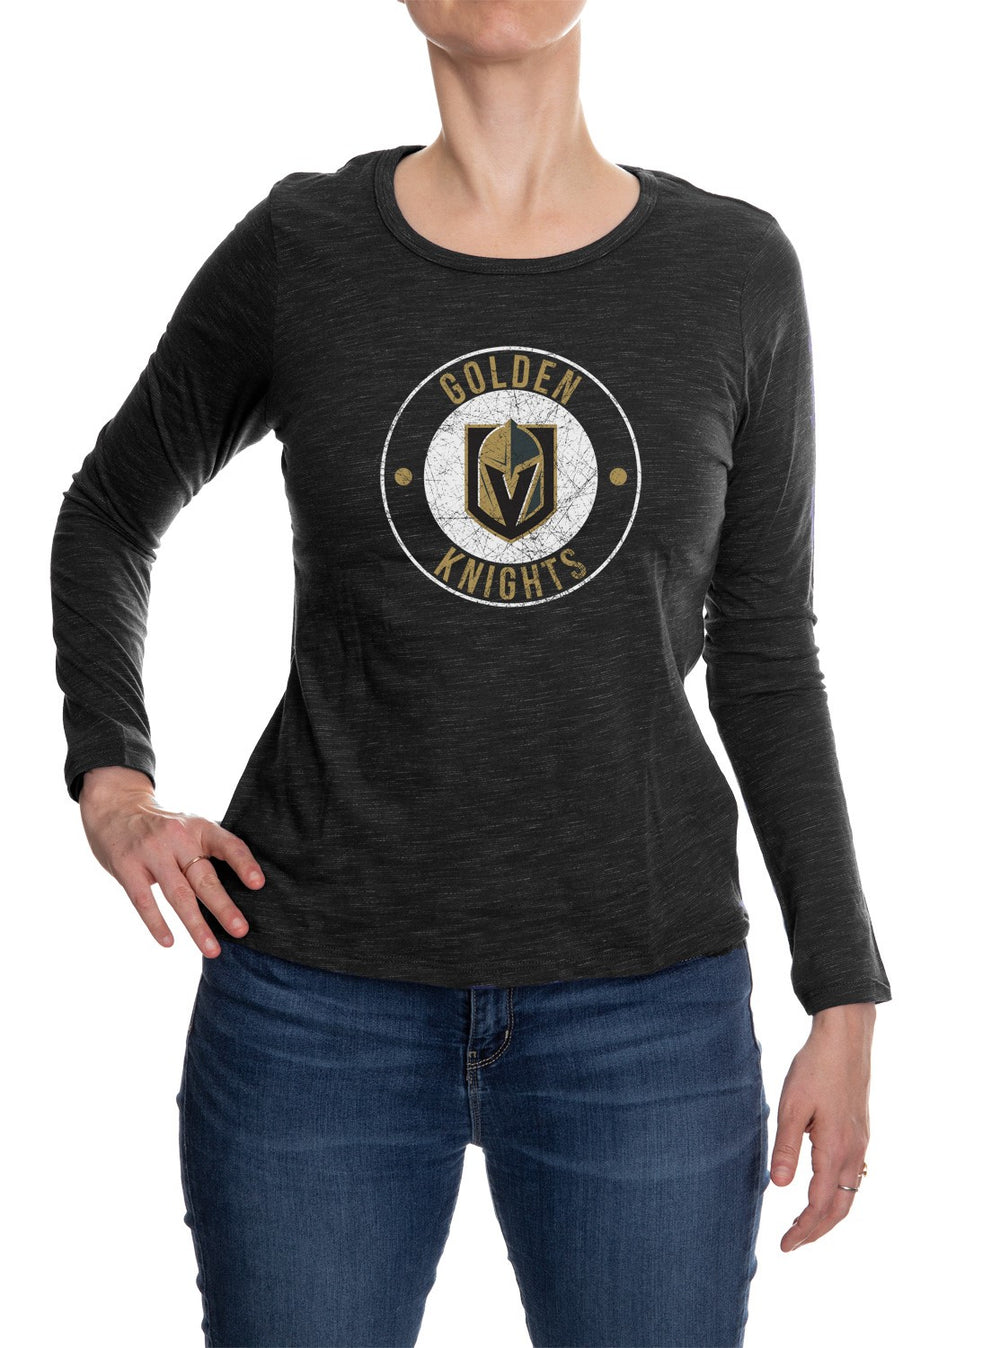 Vegas Golden Knights Distressed Logo Long Sleeve Shirt for Women in Black Front View